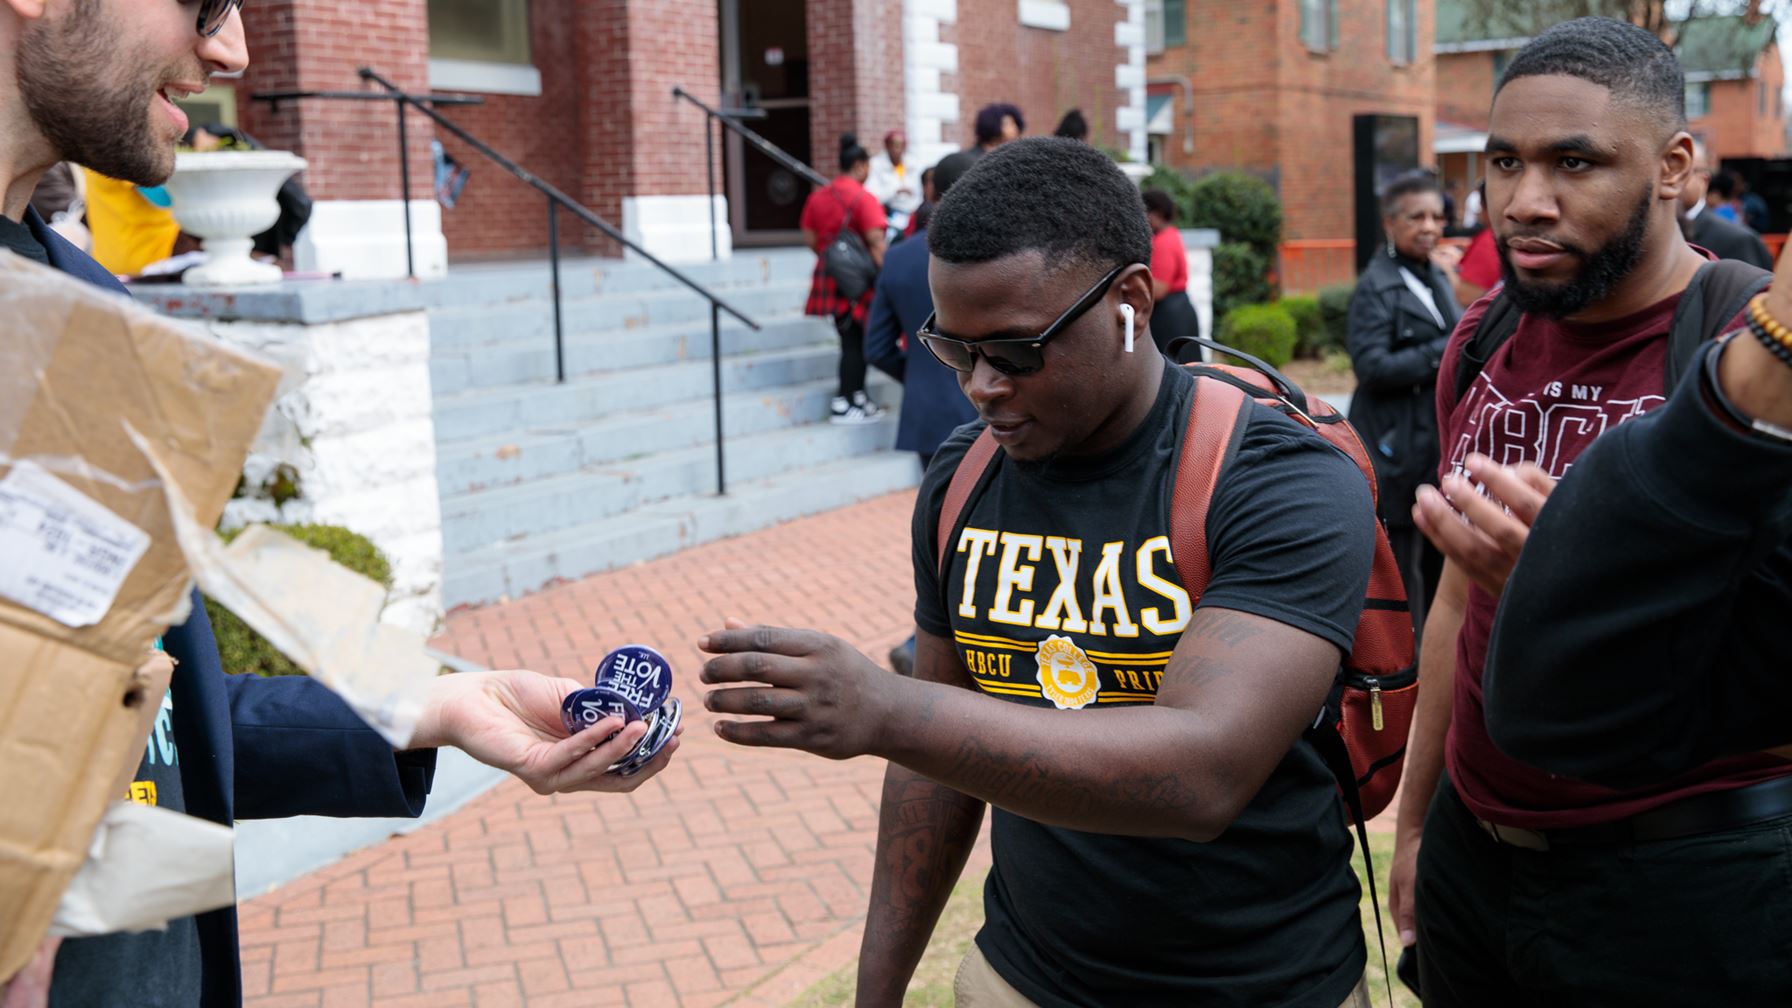 University students on a campus exchanging buttons that read "Free the Vote"